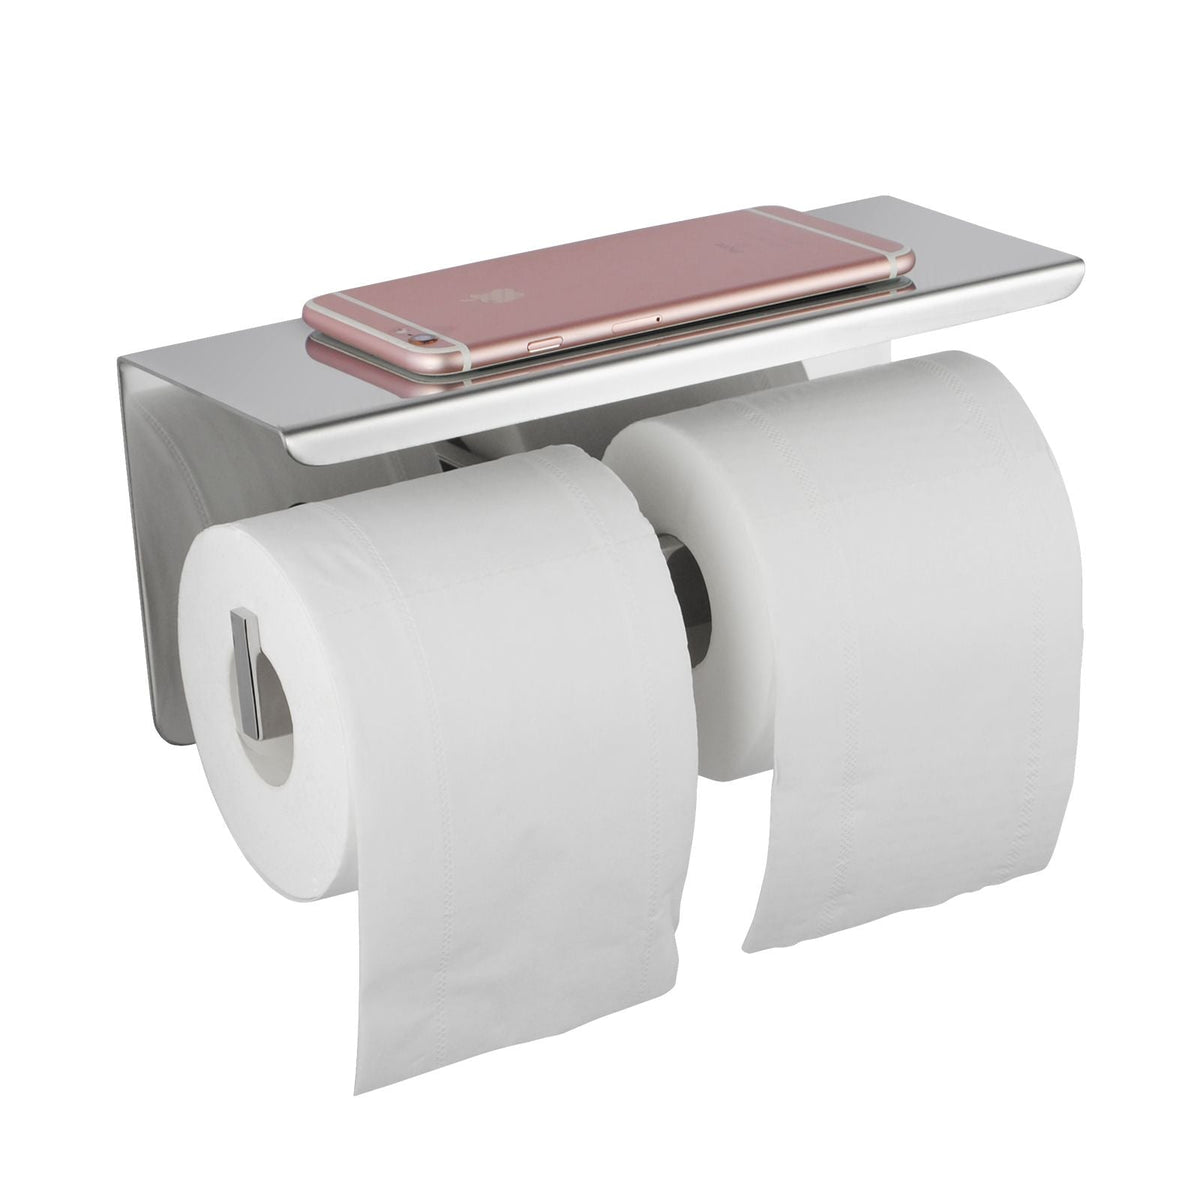 BLAZE Chrome Double Toilet Paper Holder with Cover